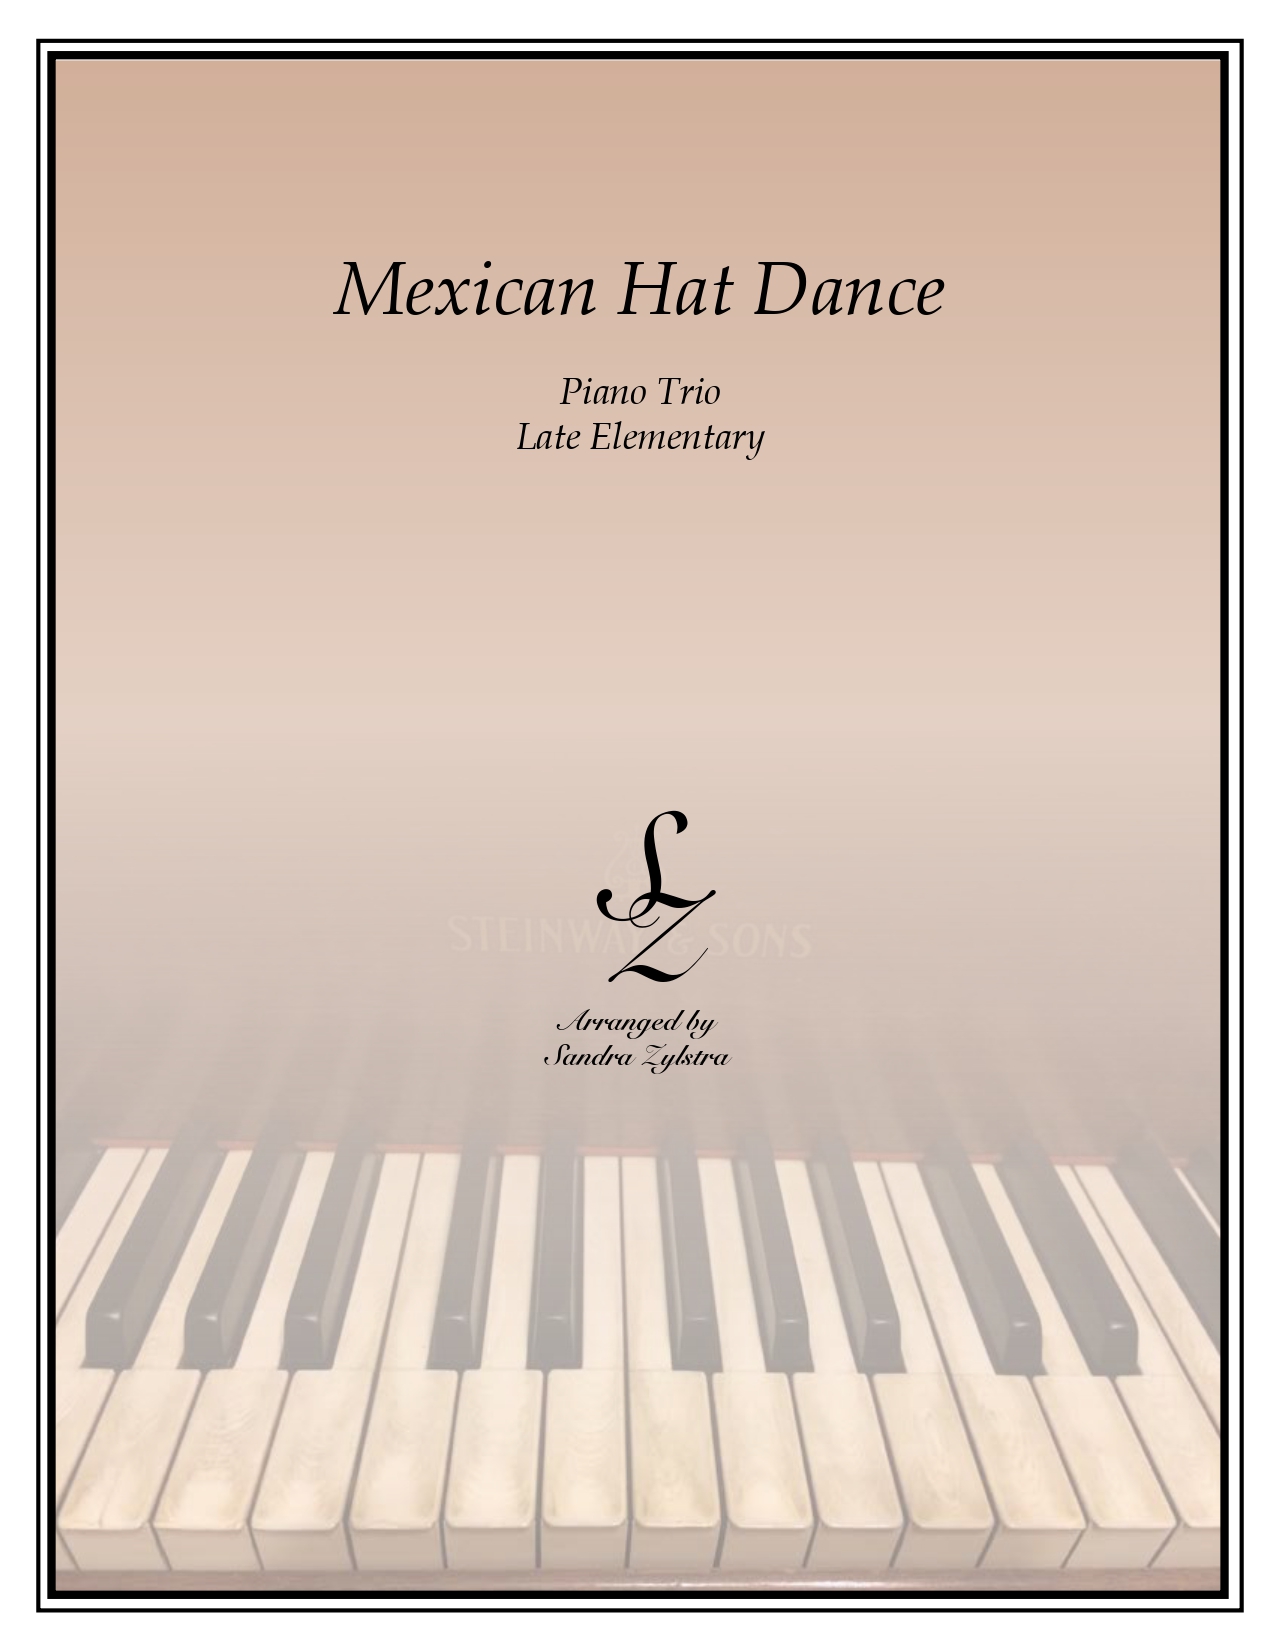 Mexican Hat Dance Trio parts cover page 00011